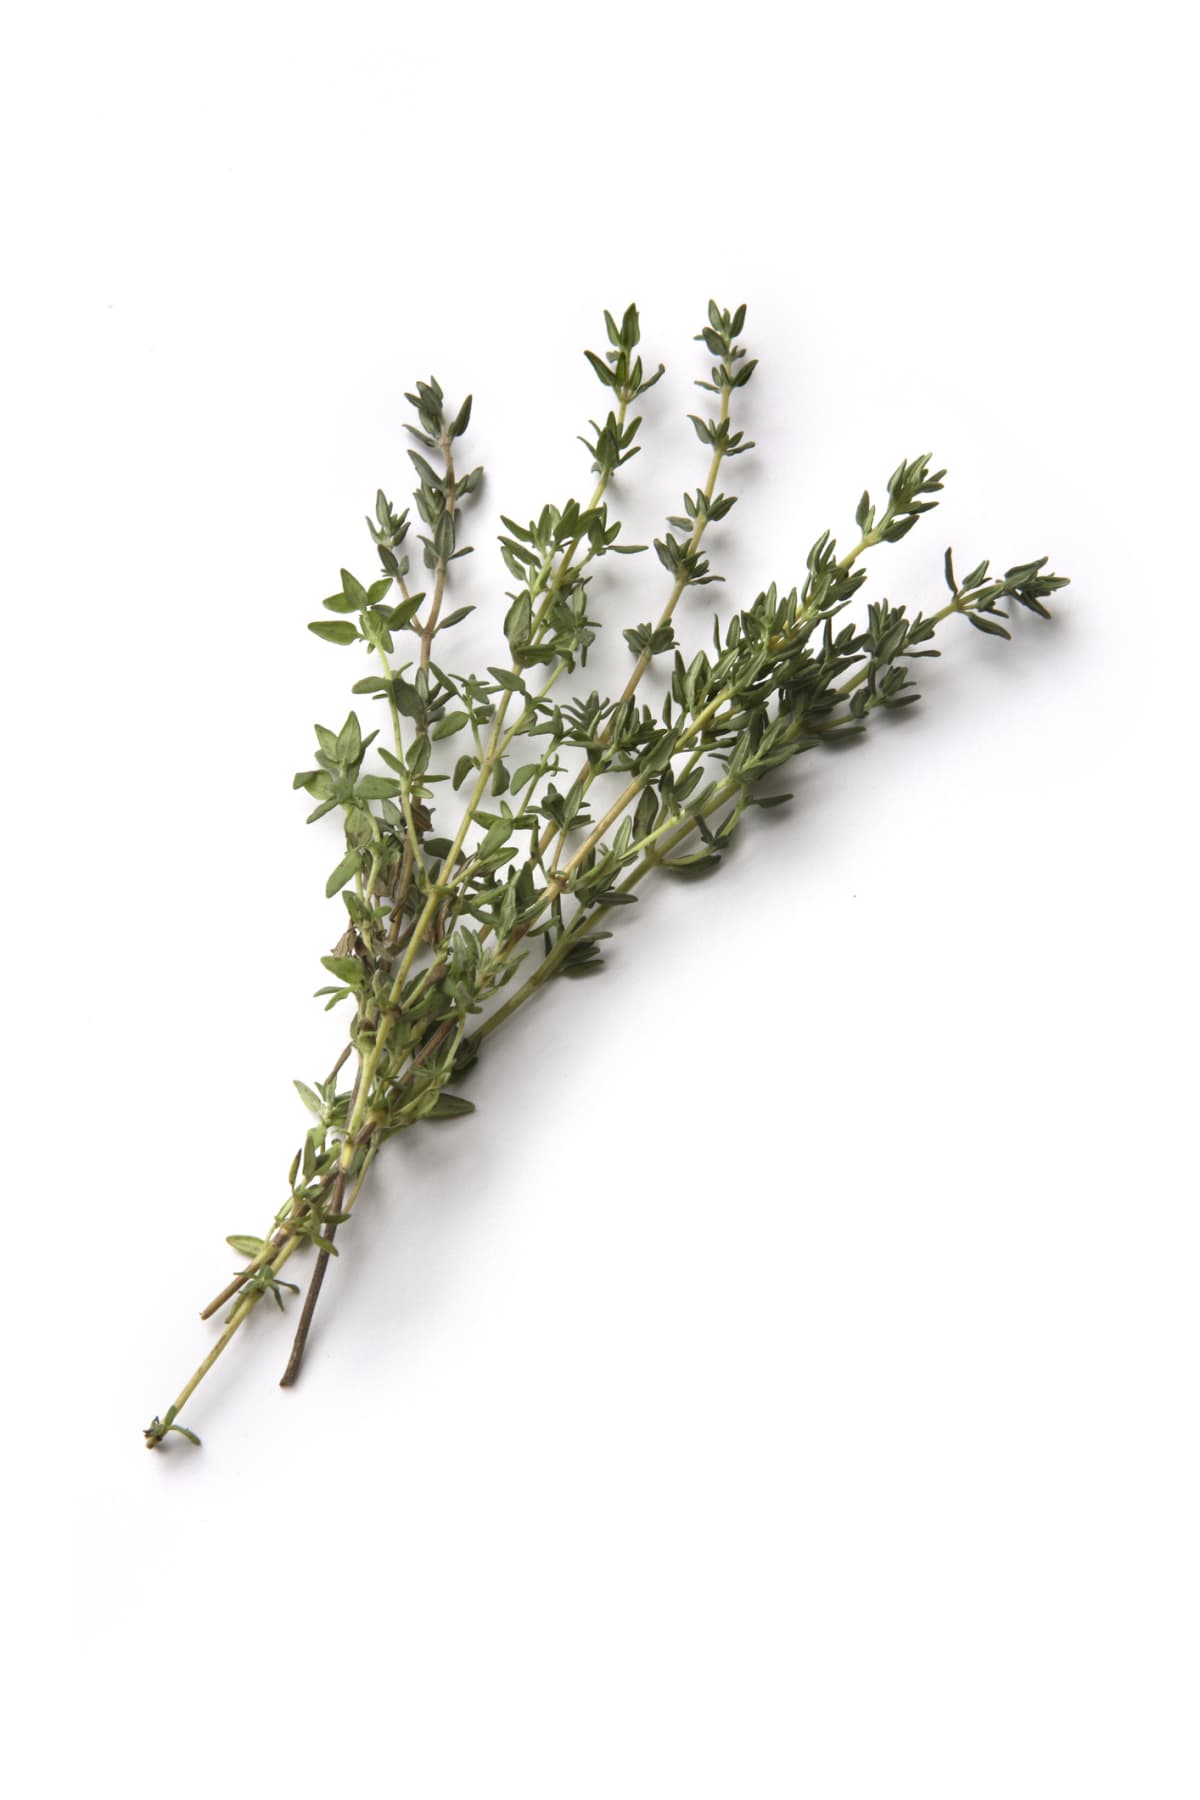 A sprig of thyme on a white background